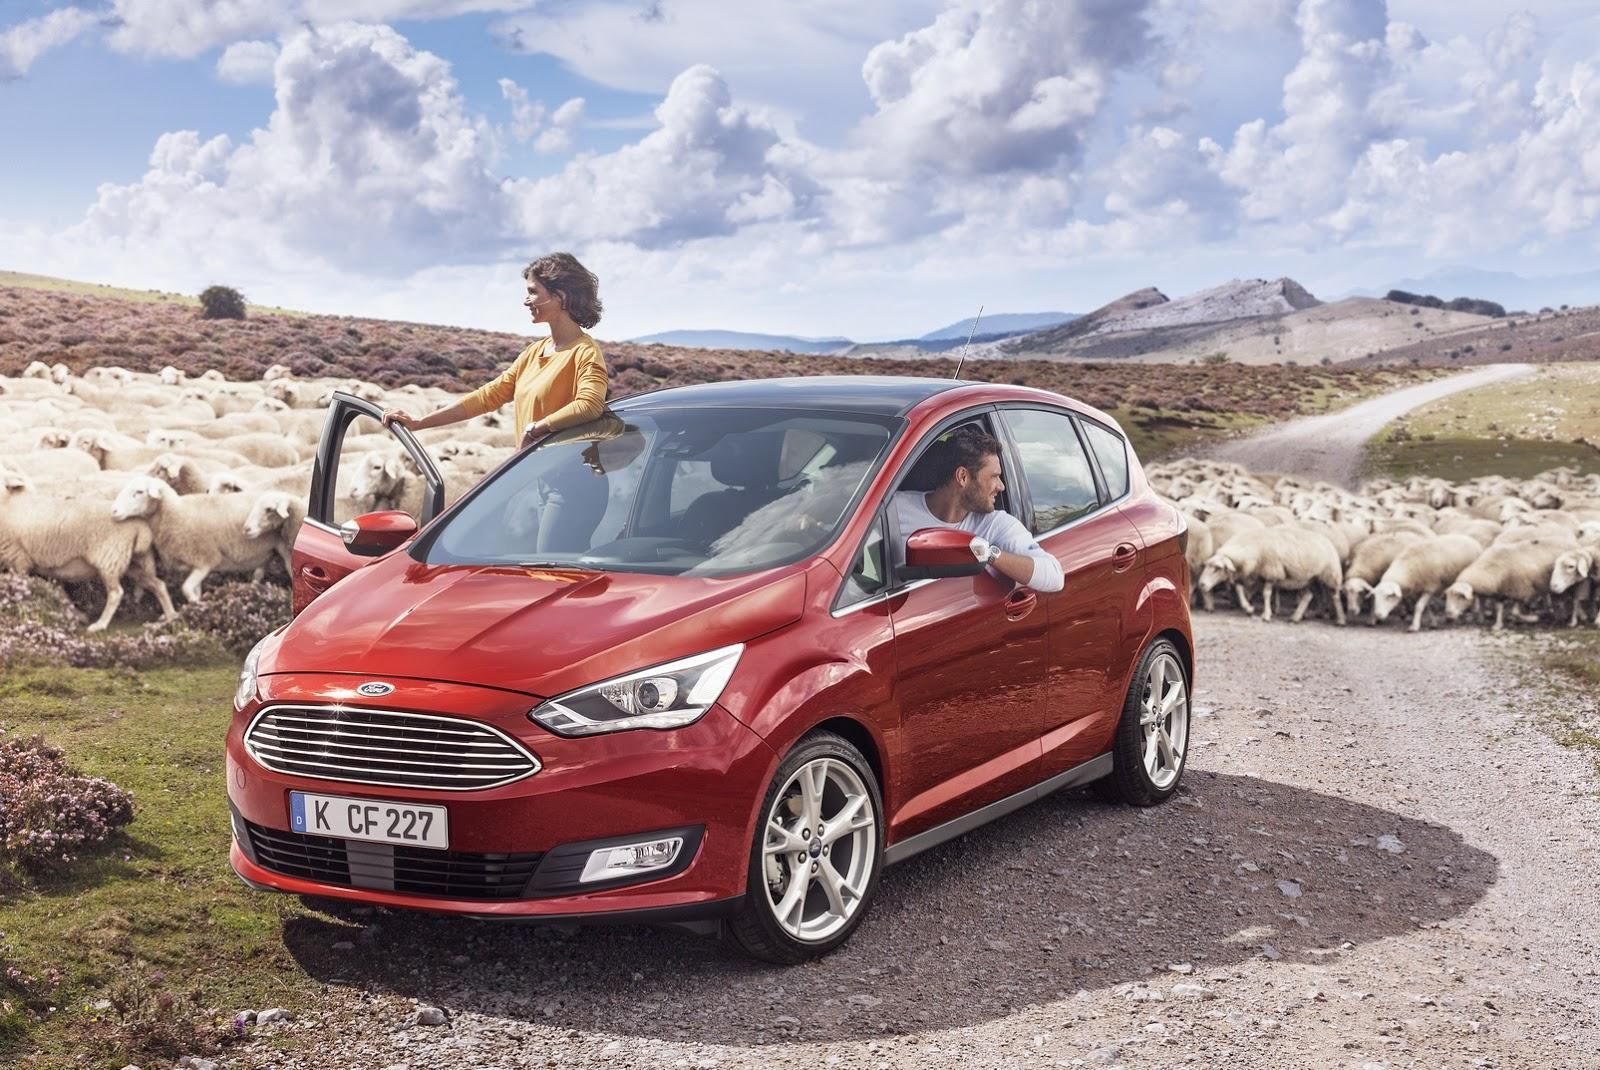 YEN 2015 FORD C-MAX RESM GALERS